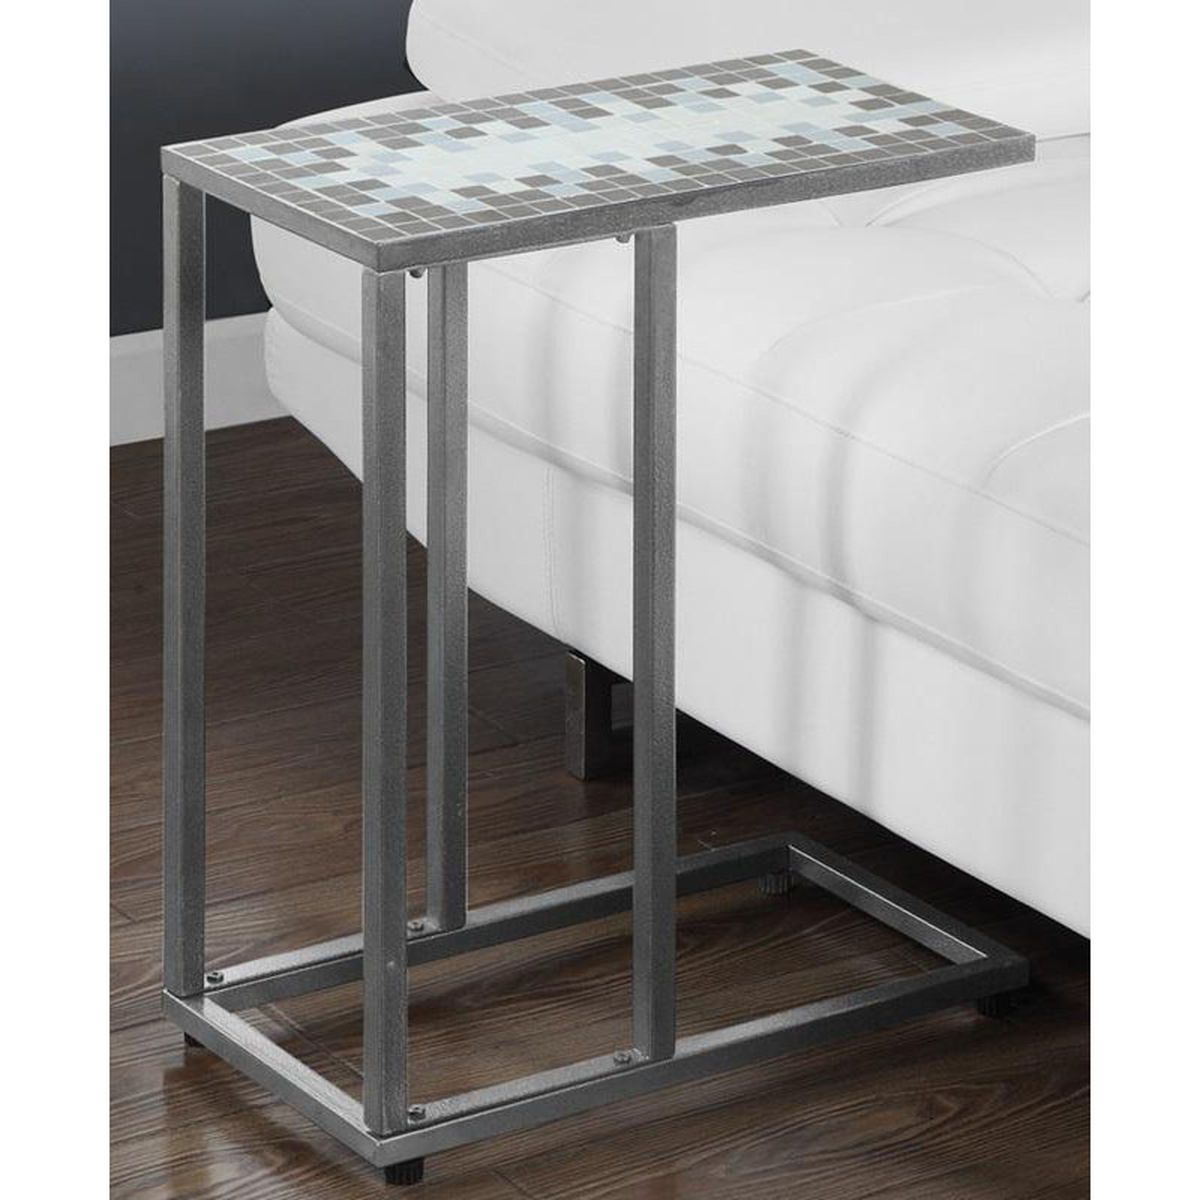 hammered metal accent table bizchair monarch specialties msp main gray our slide under sofa with and blue white marble bistro outdoor nautical bathroom light fixtures large